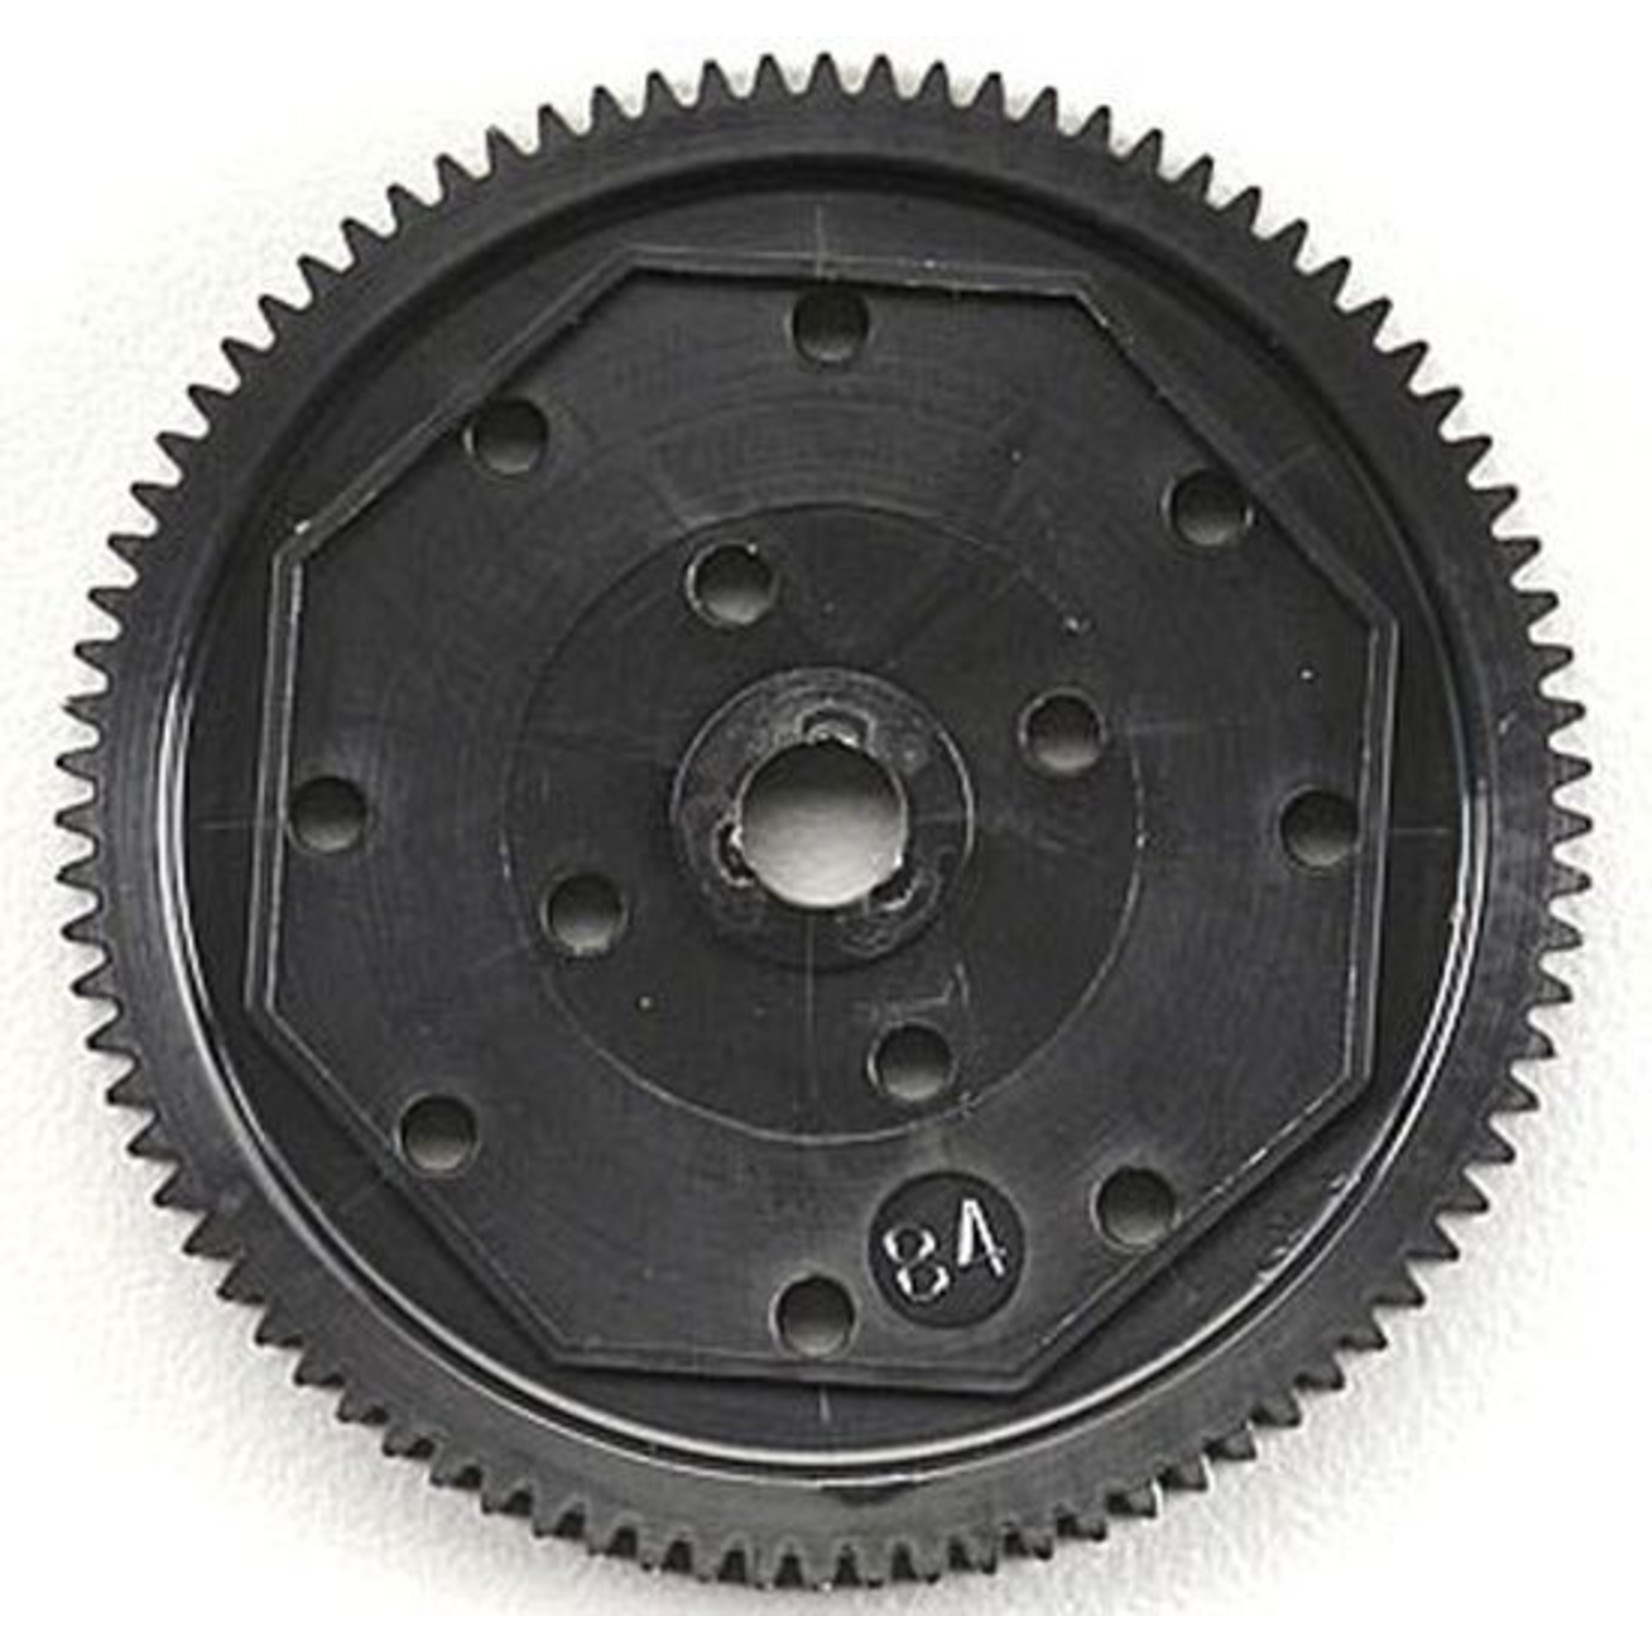 Kimbrough KIM310 - 78 Tooth 48 Pitch Slipper Gear for B6, SC10